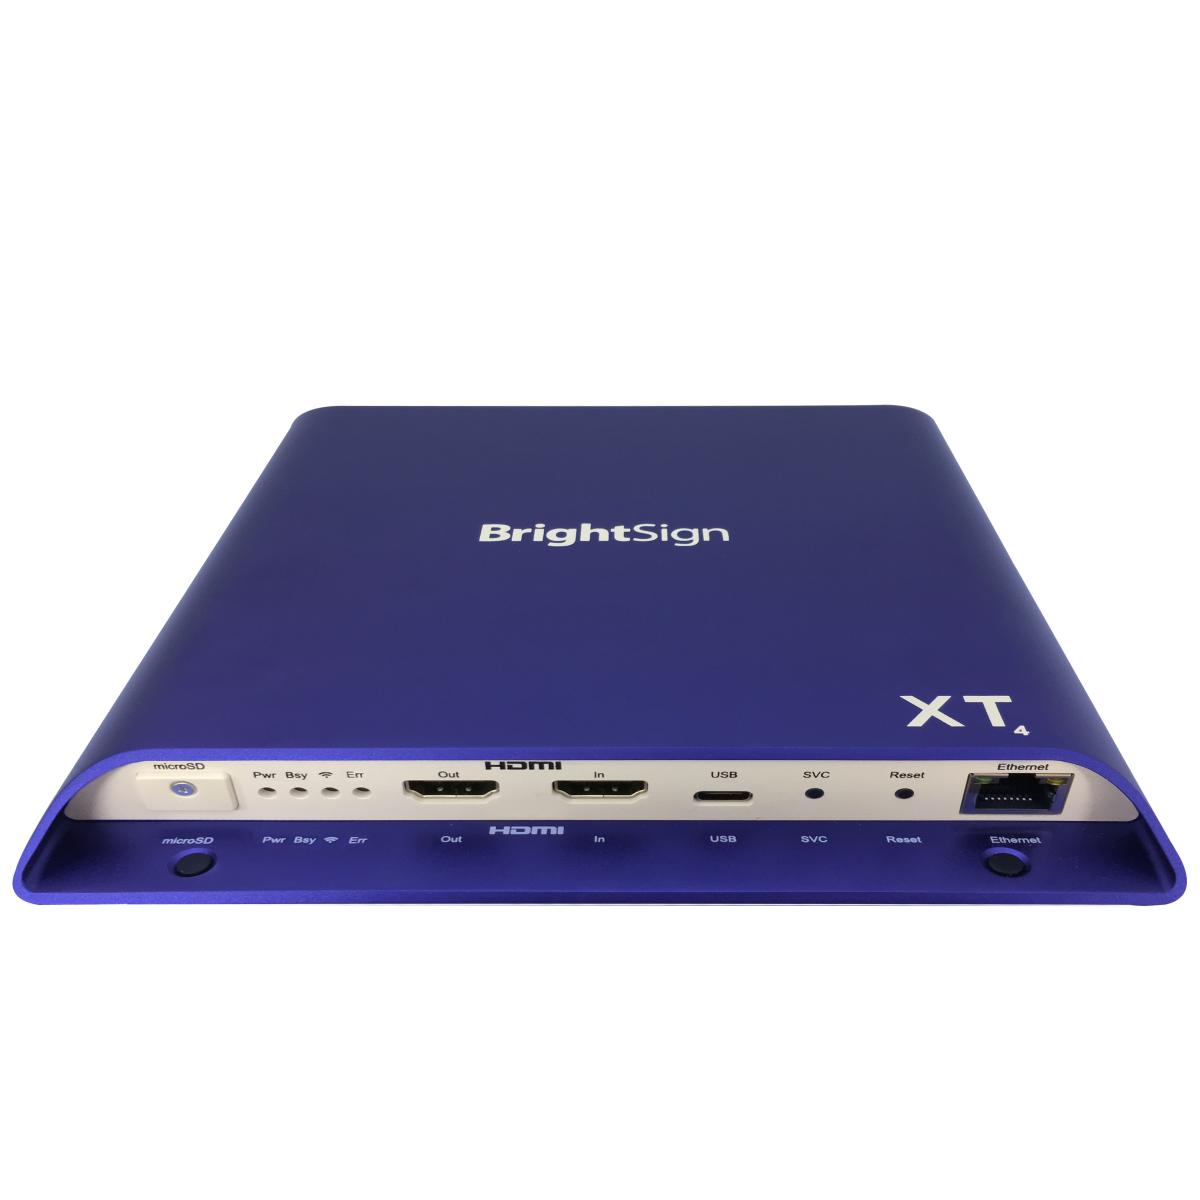 BrightSign XT1144 Expanded I/O Player - Purple